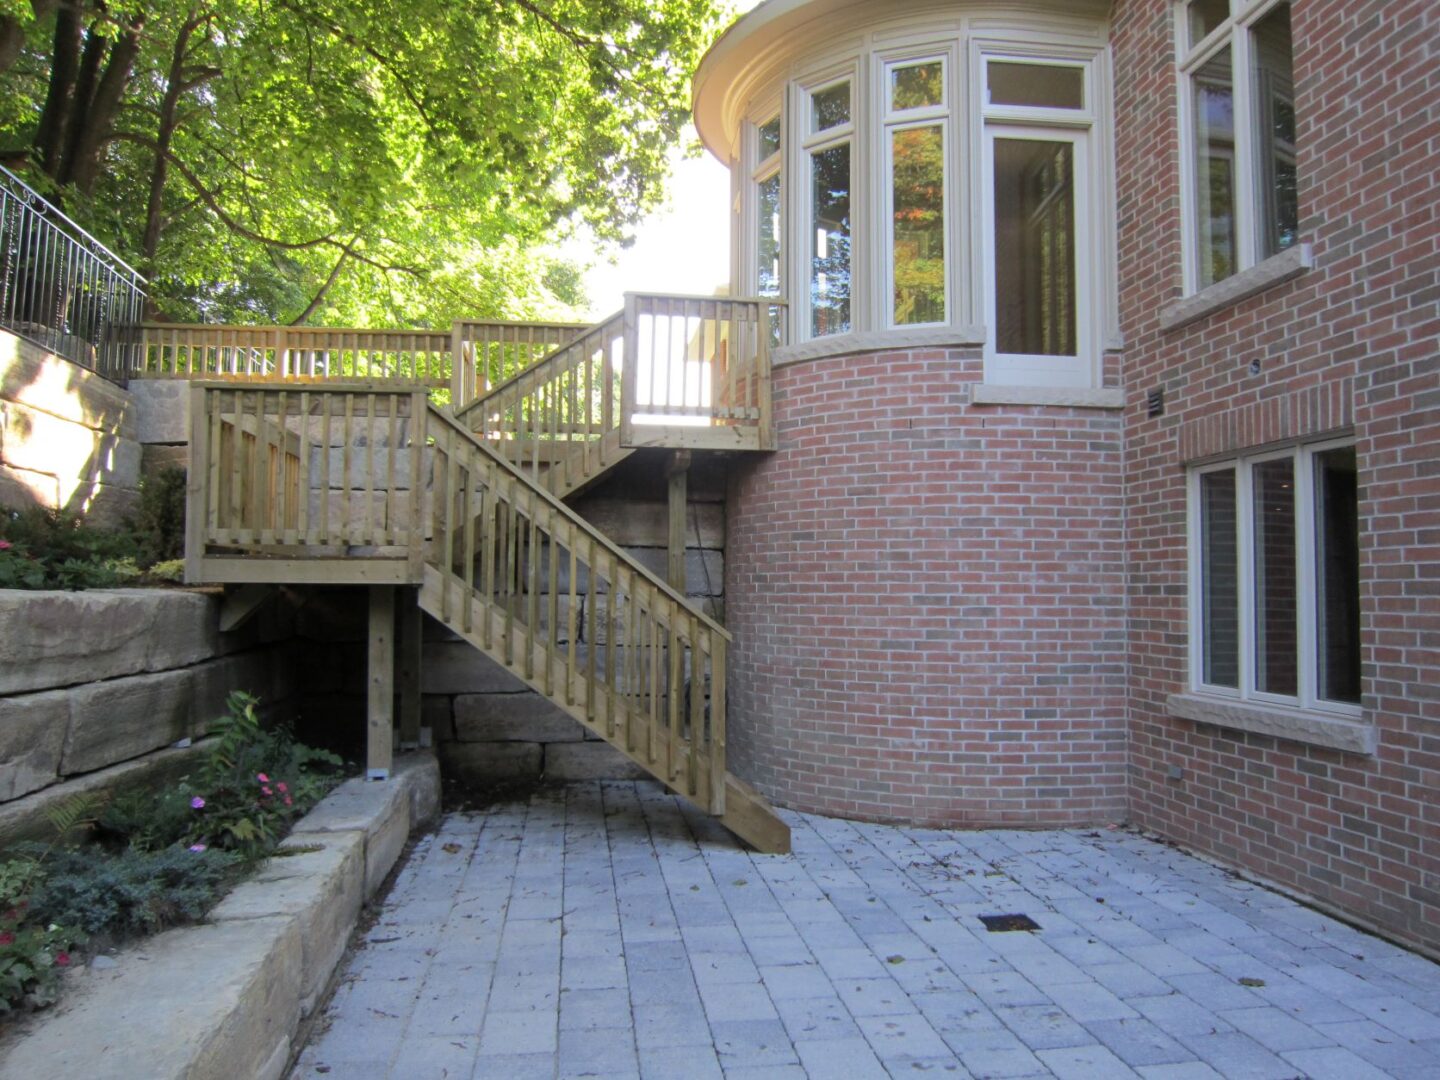 A Brick Wall Building With Wooden Stairs